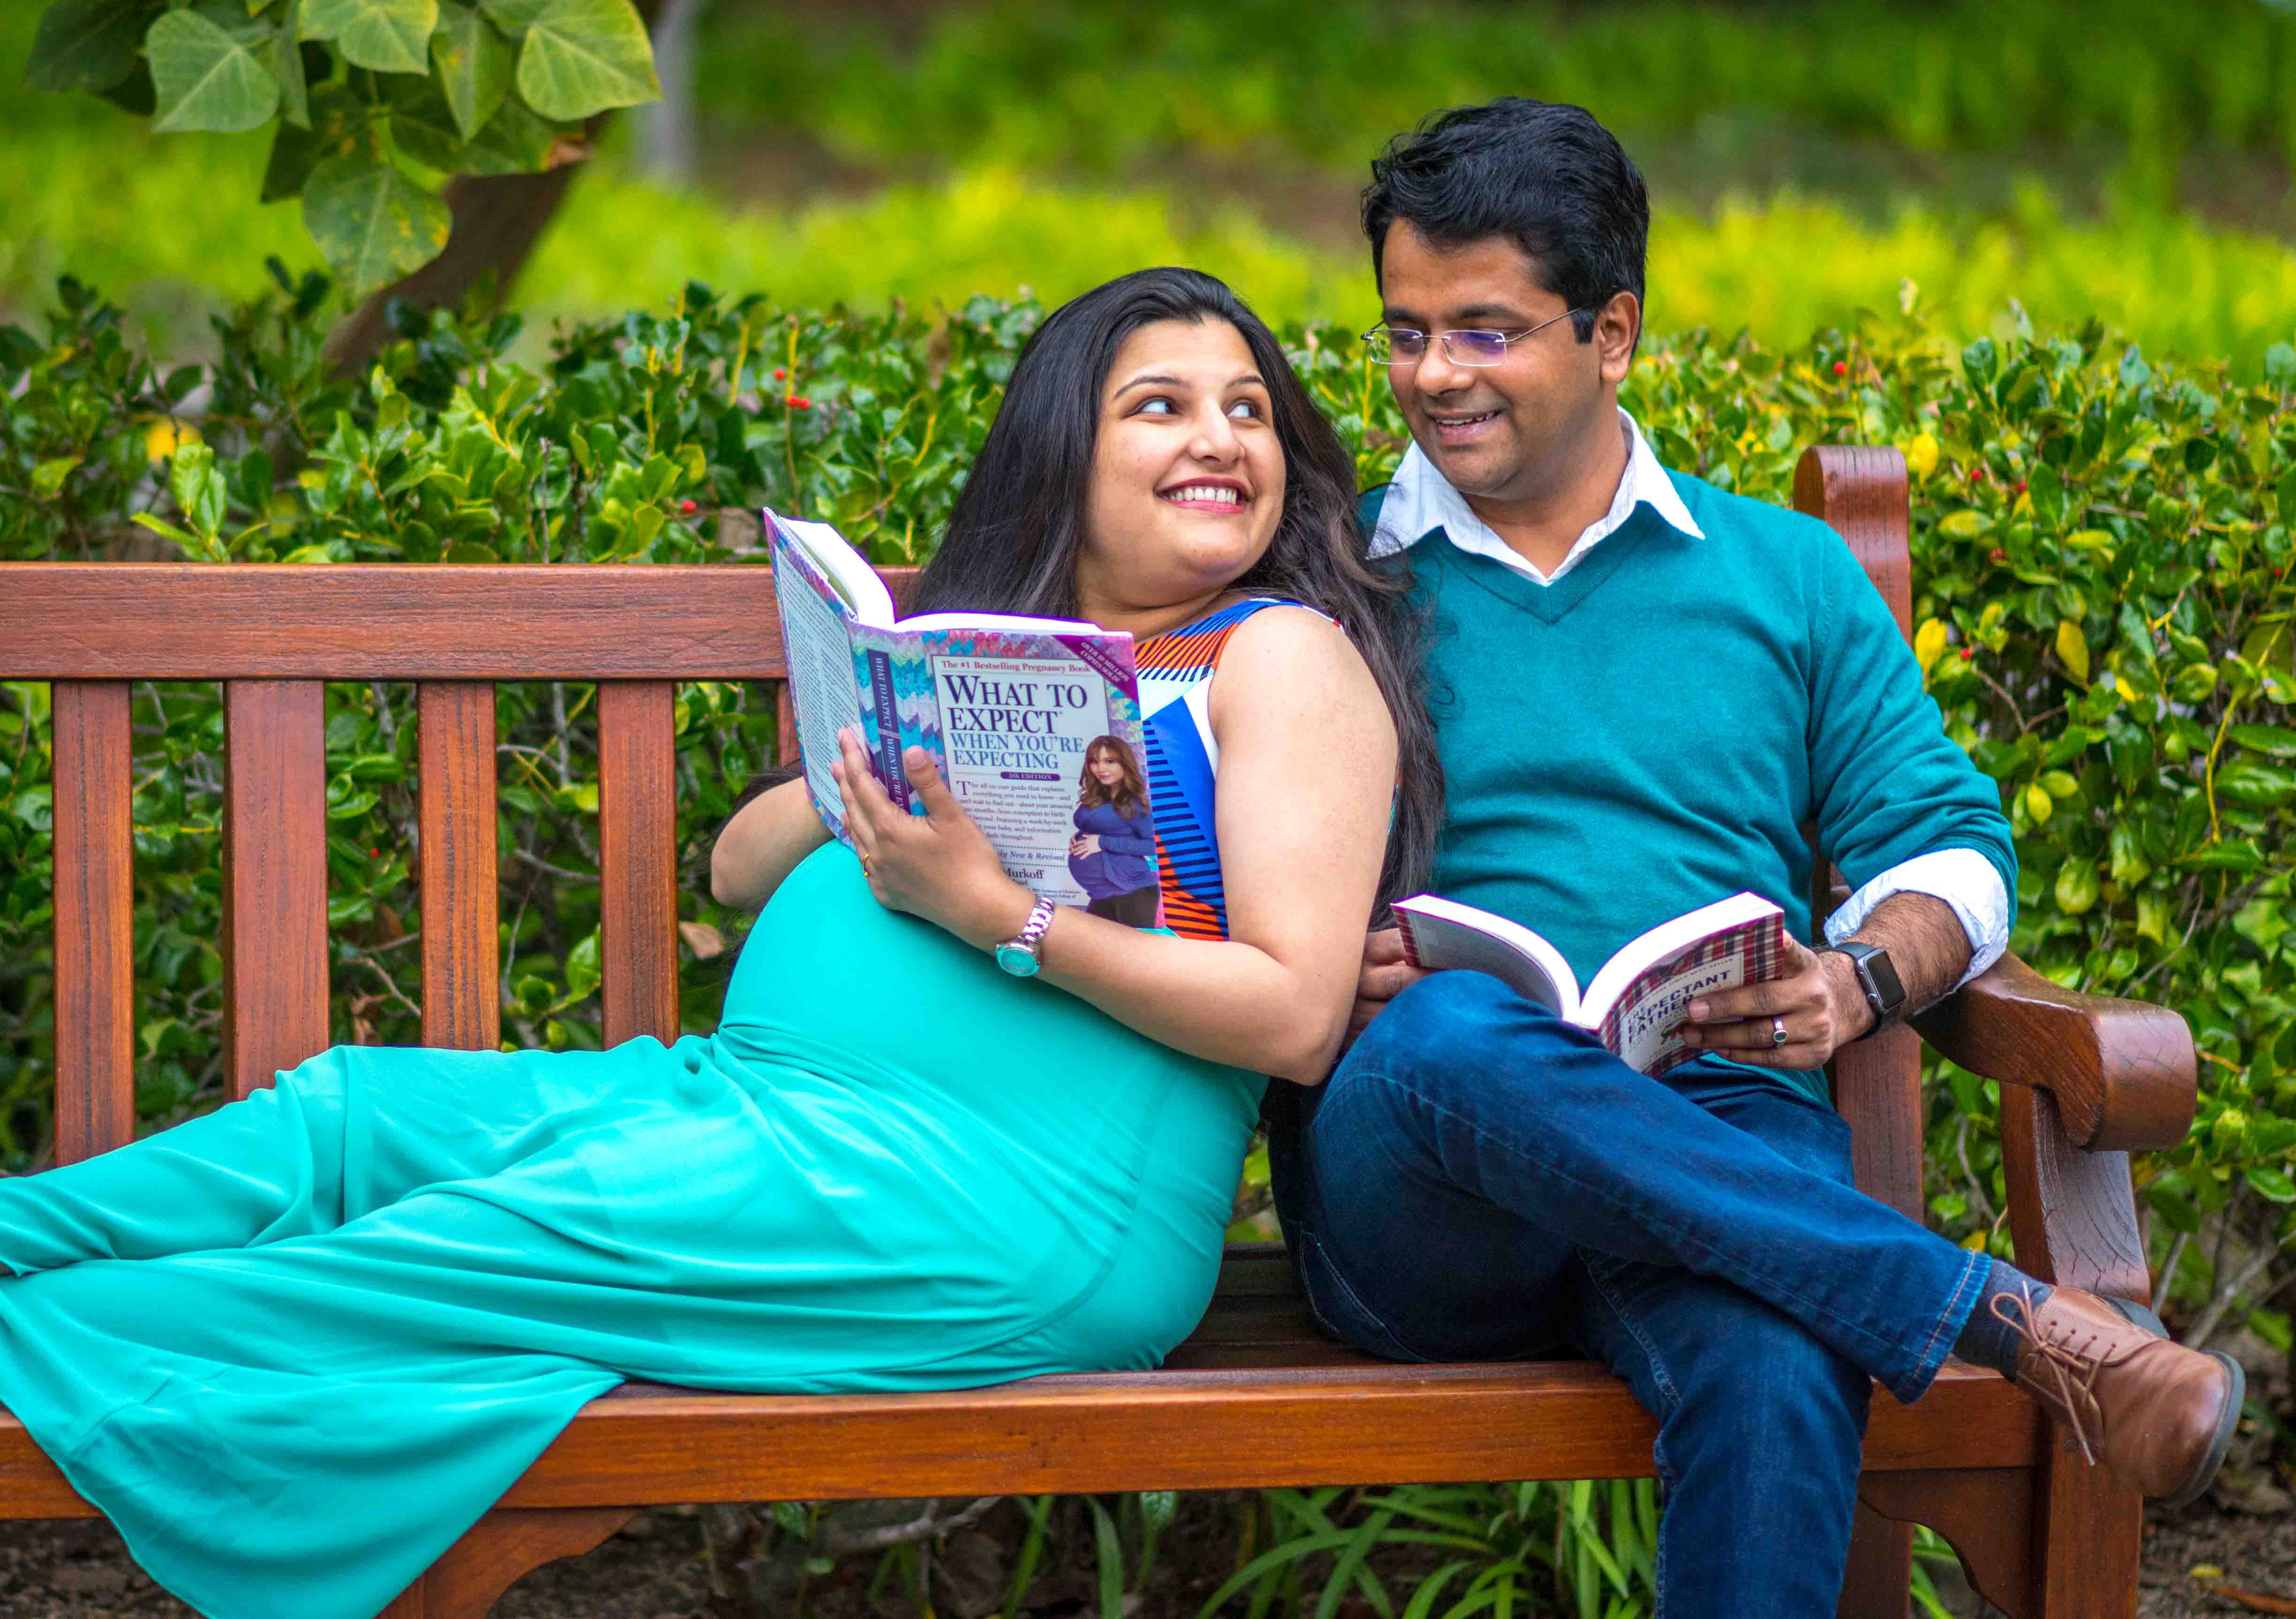 Unique Outdoors Baby Shower Photography Poses Ideas In India